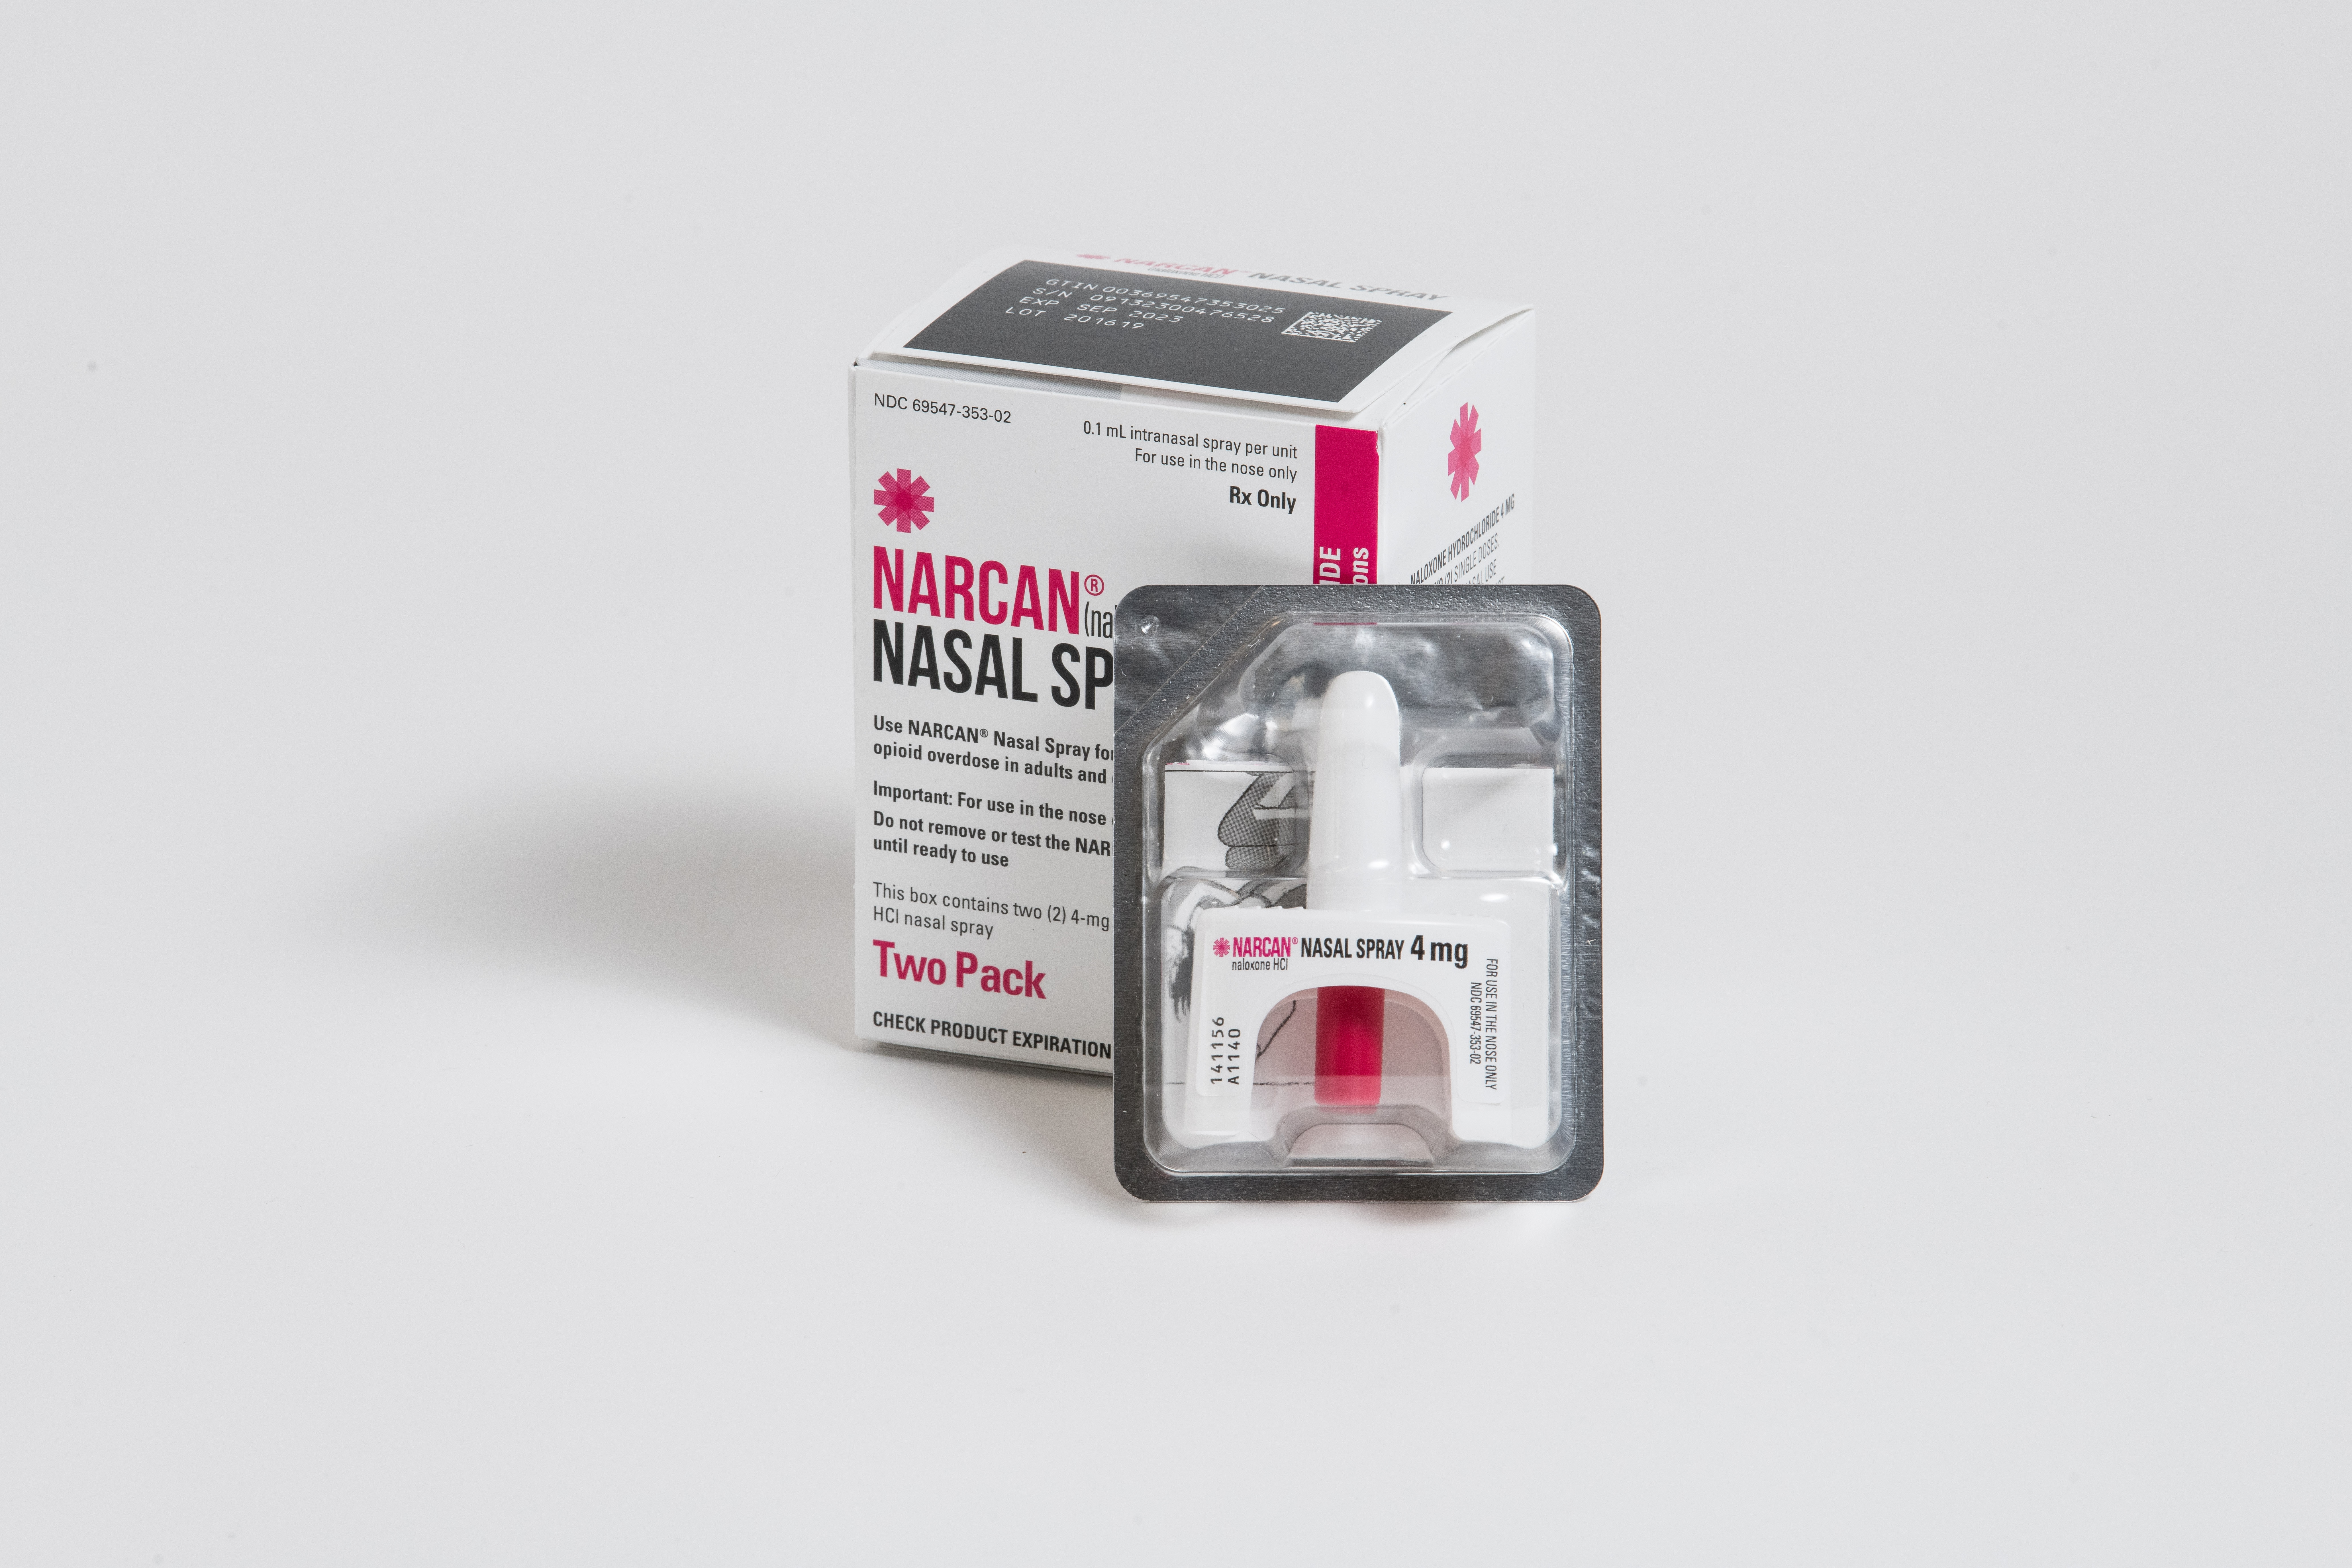 an image of Narcan (naloxone) an opioid overdose reversal medication and nasal spray